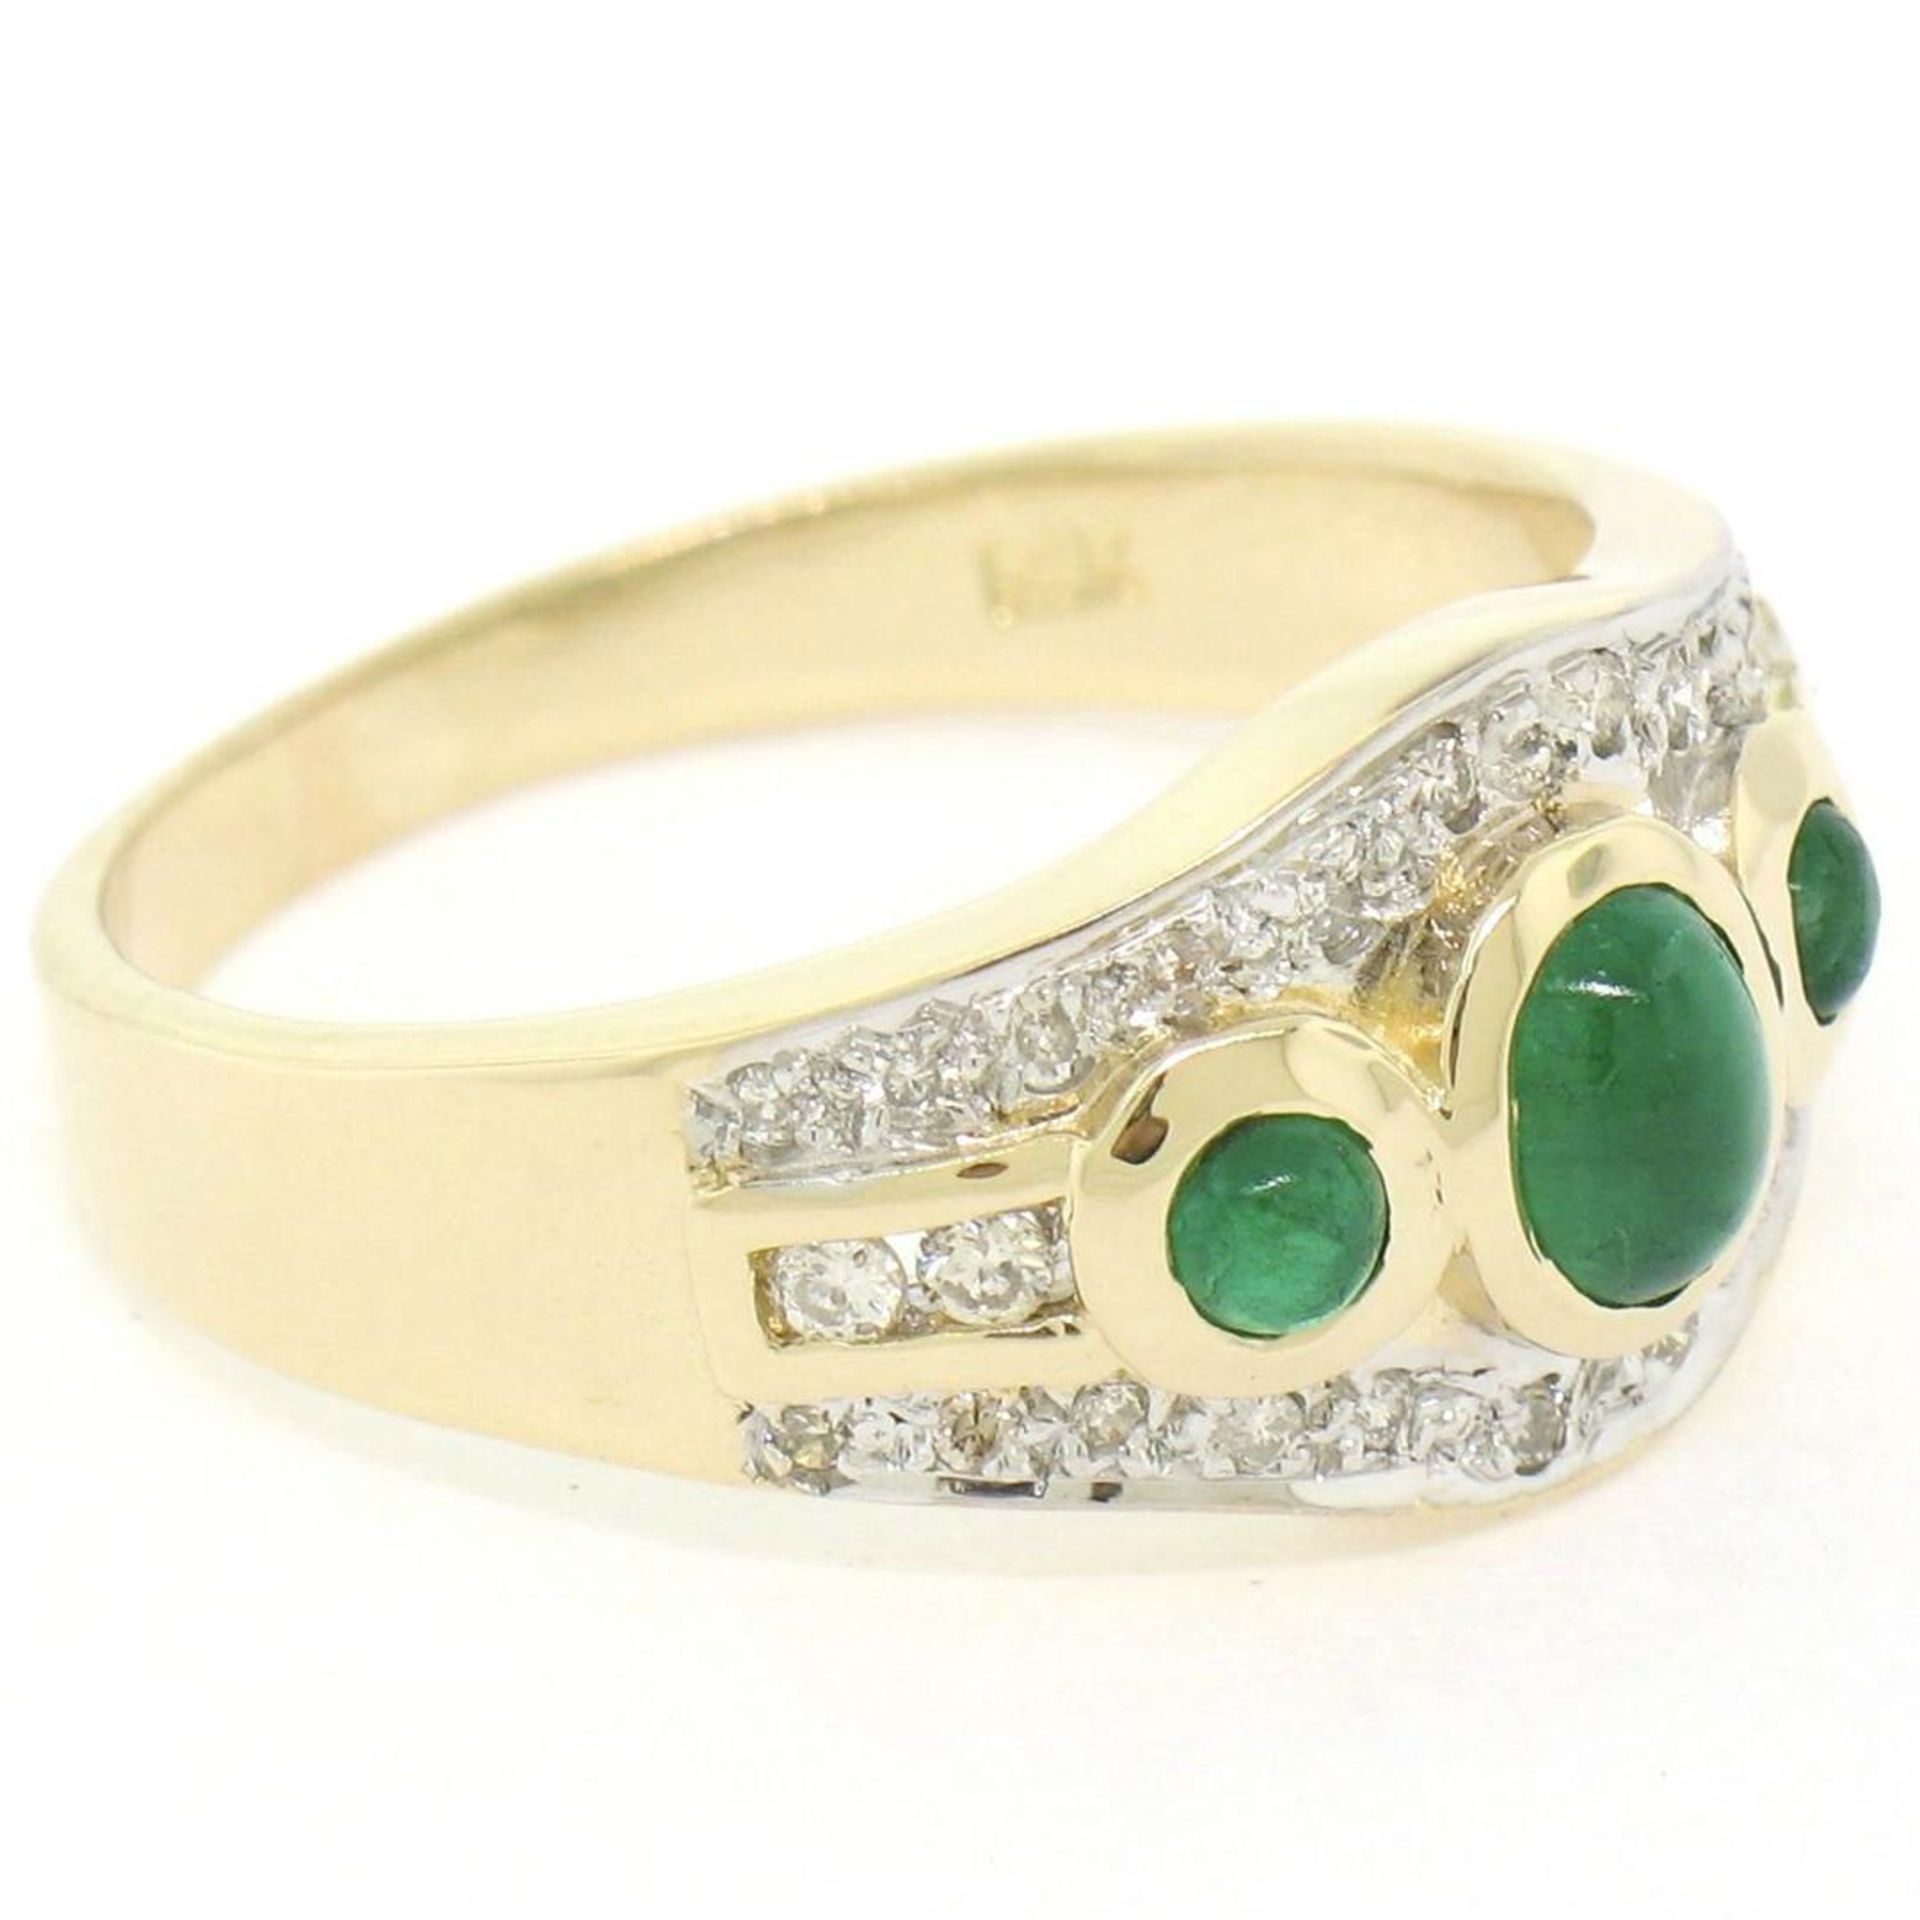 Petite 14K TT Gold 0.68 ctw 3 Cabochon Emerald & Diamond Accented Cocktail Ring - Image 3 of 9